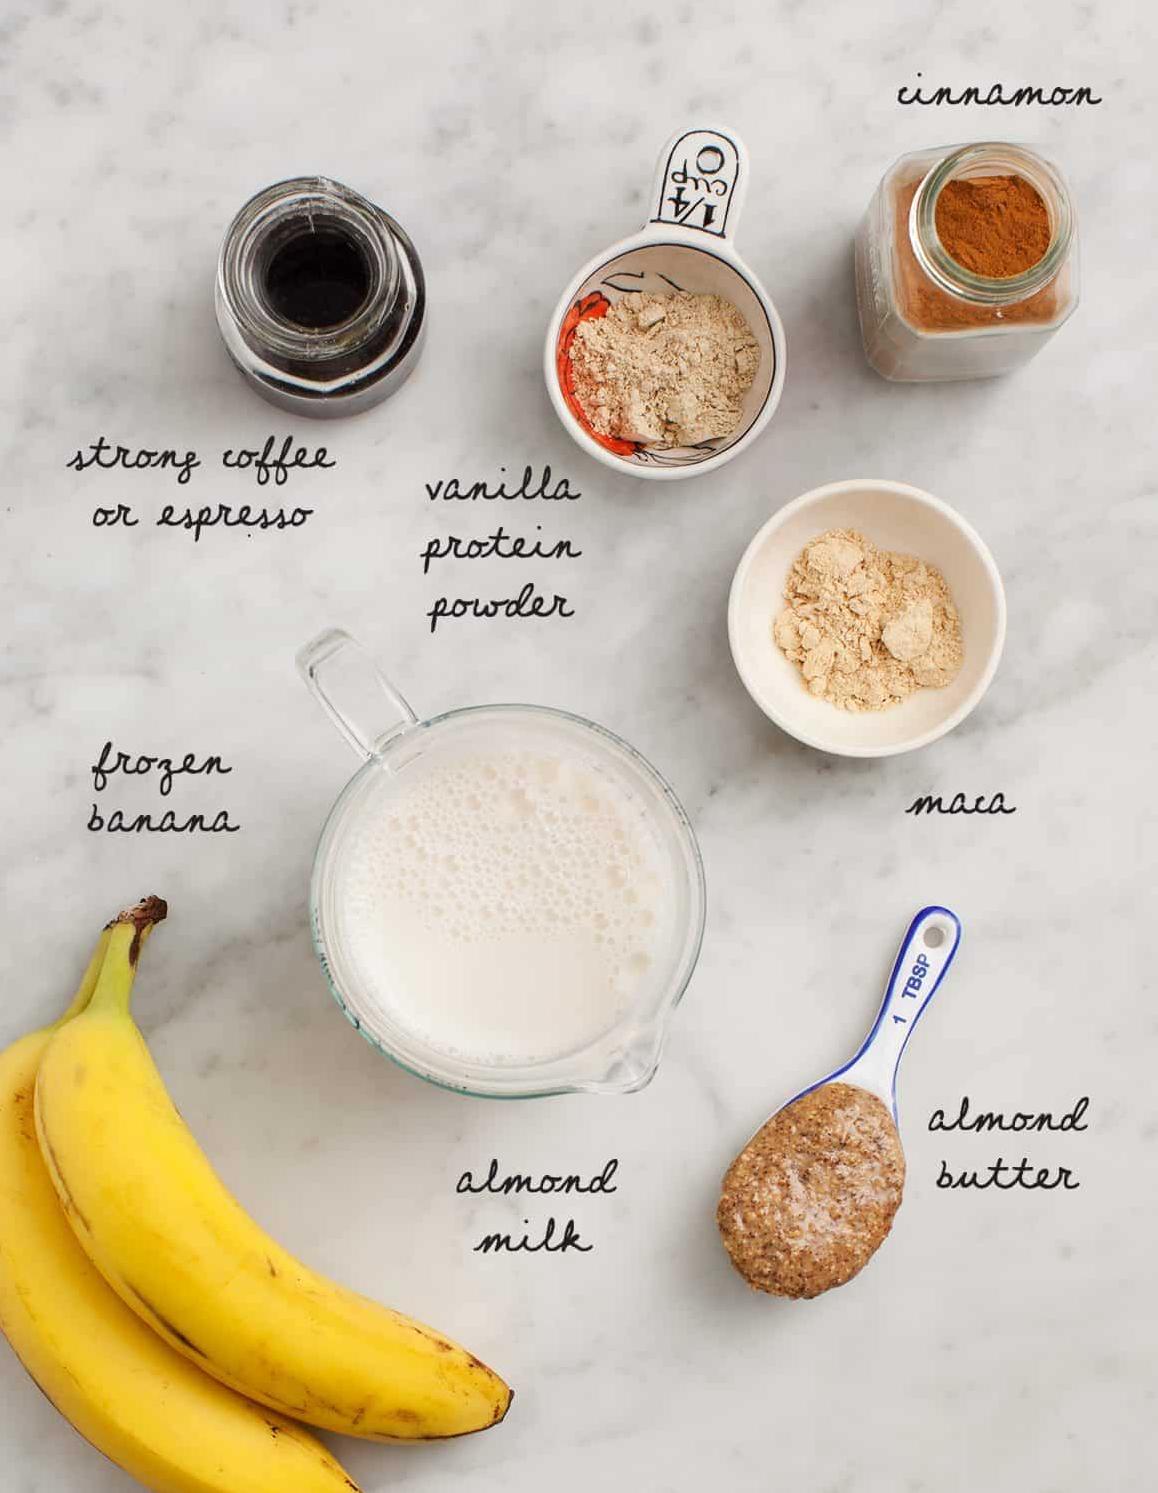  Coffee in a smoothie? Don't knock it till you try it!